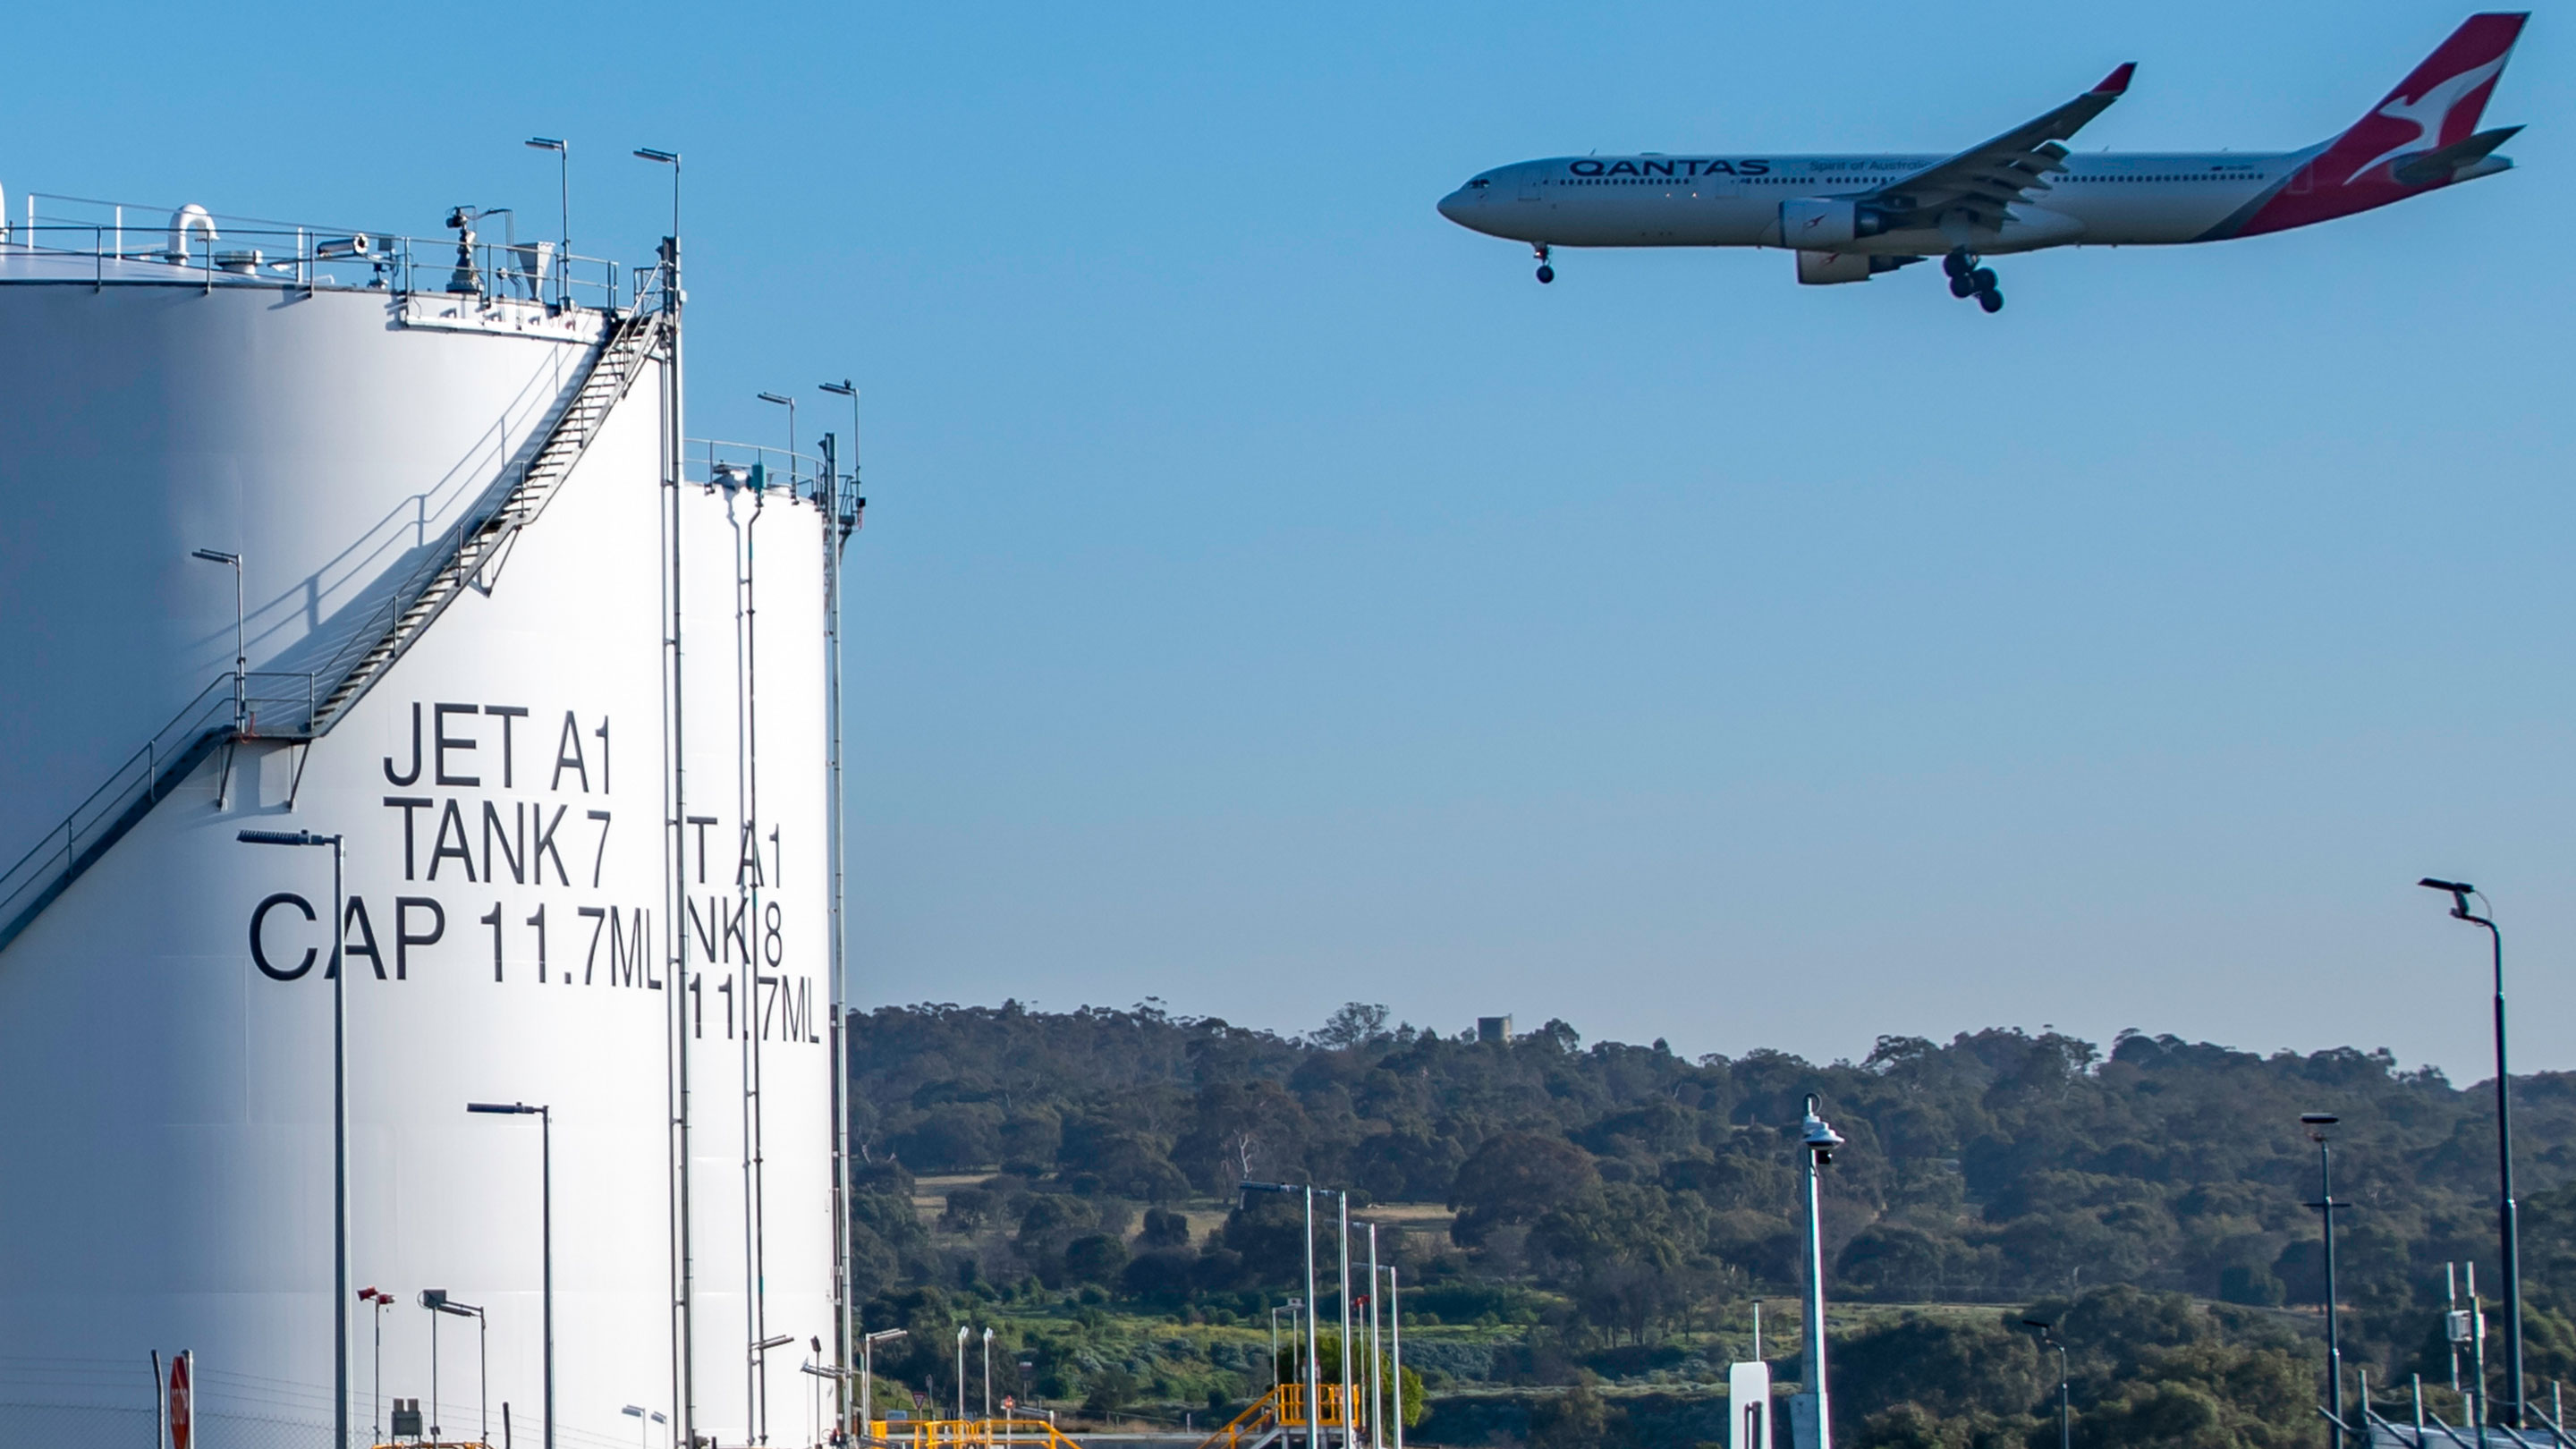 The Mobil aviation team are proud to be leading the industry to improve jet fuel filtration during refuelling at airports in Australia and New Zealand.